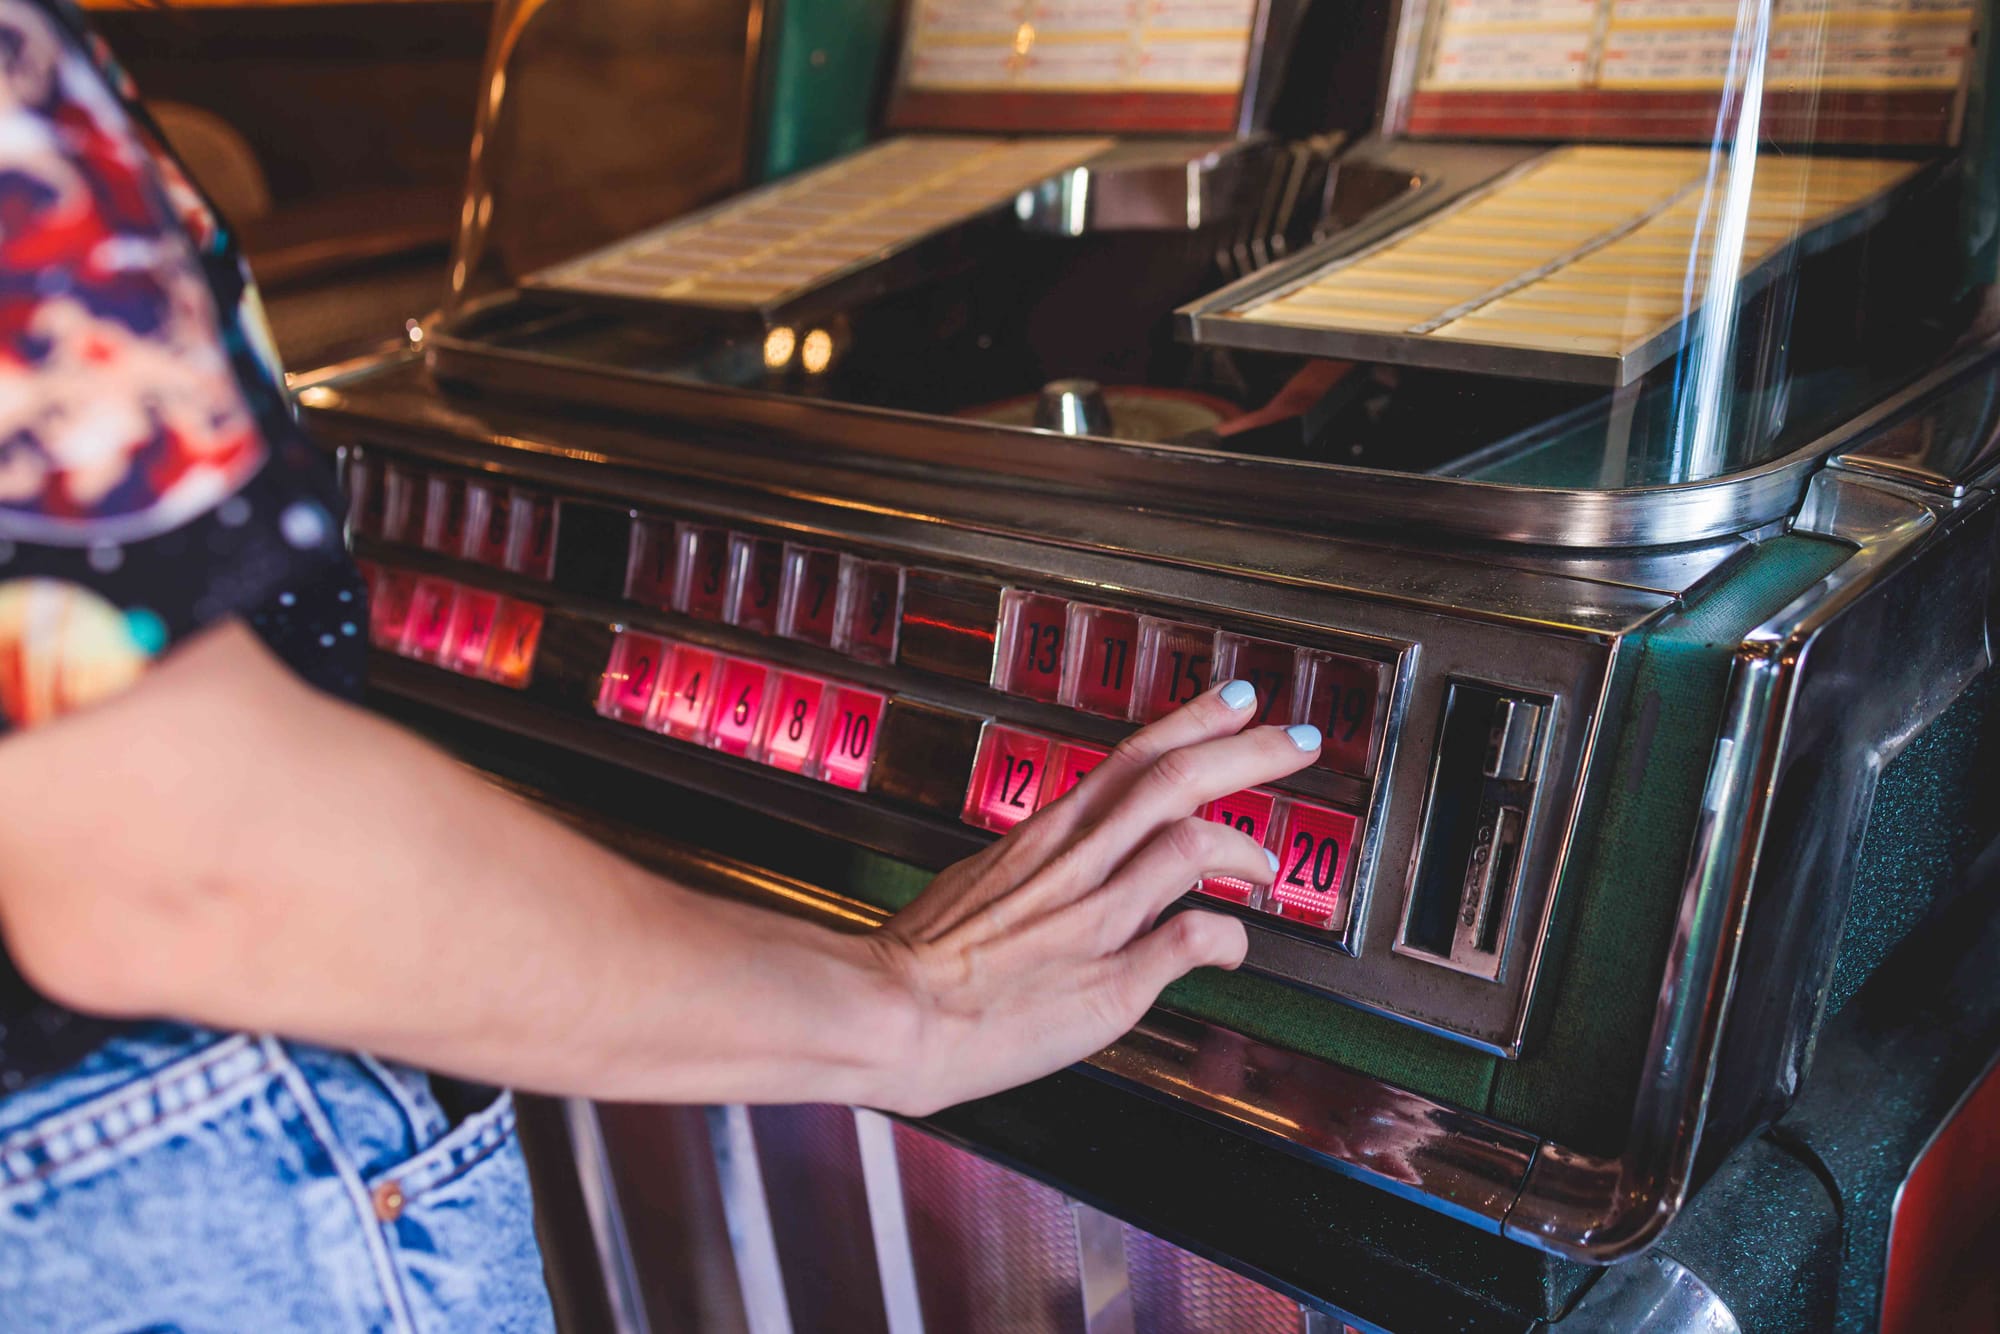 A person makes a music selection from a vintage jukebox